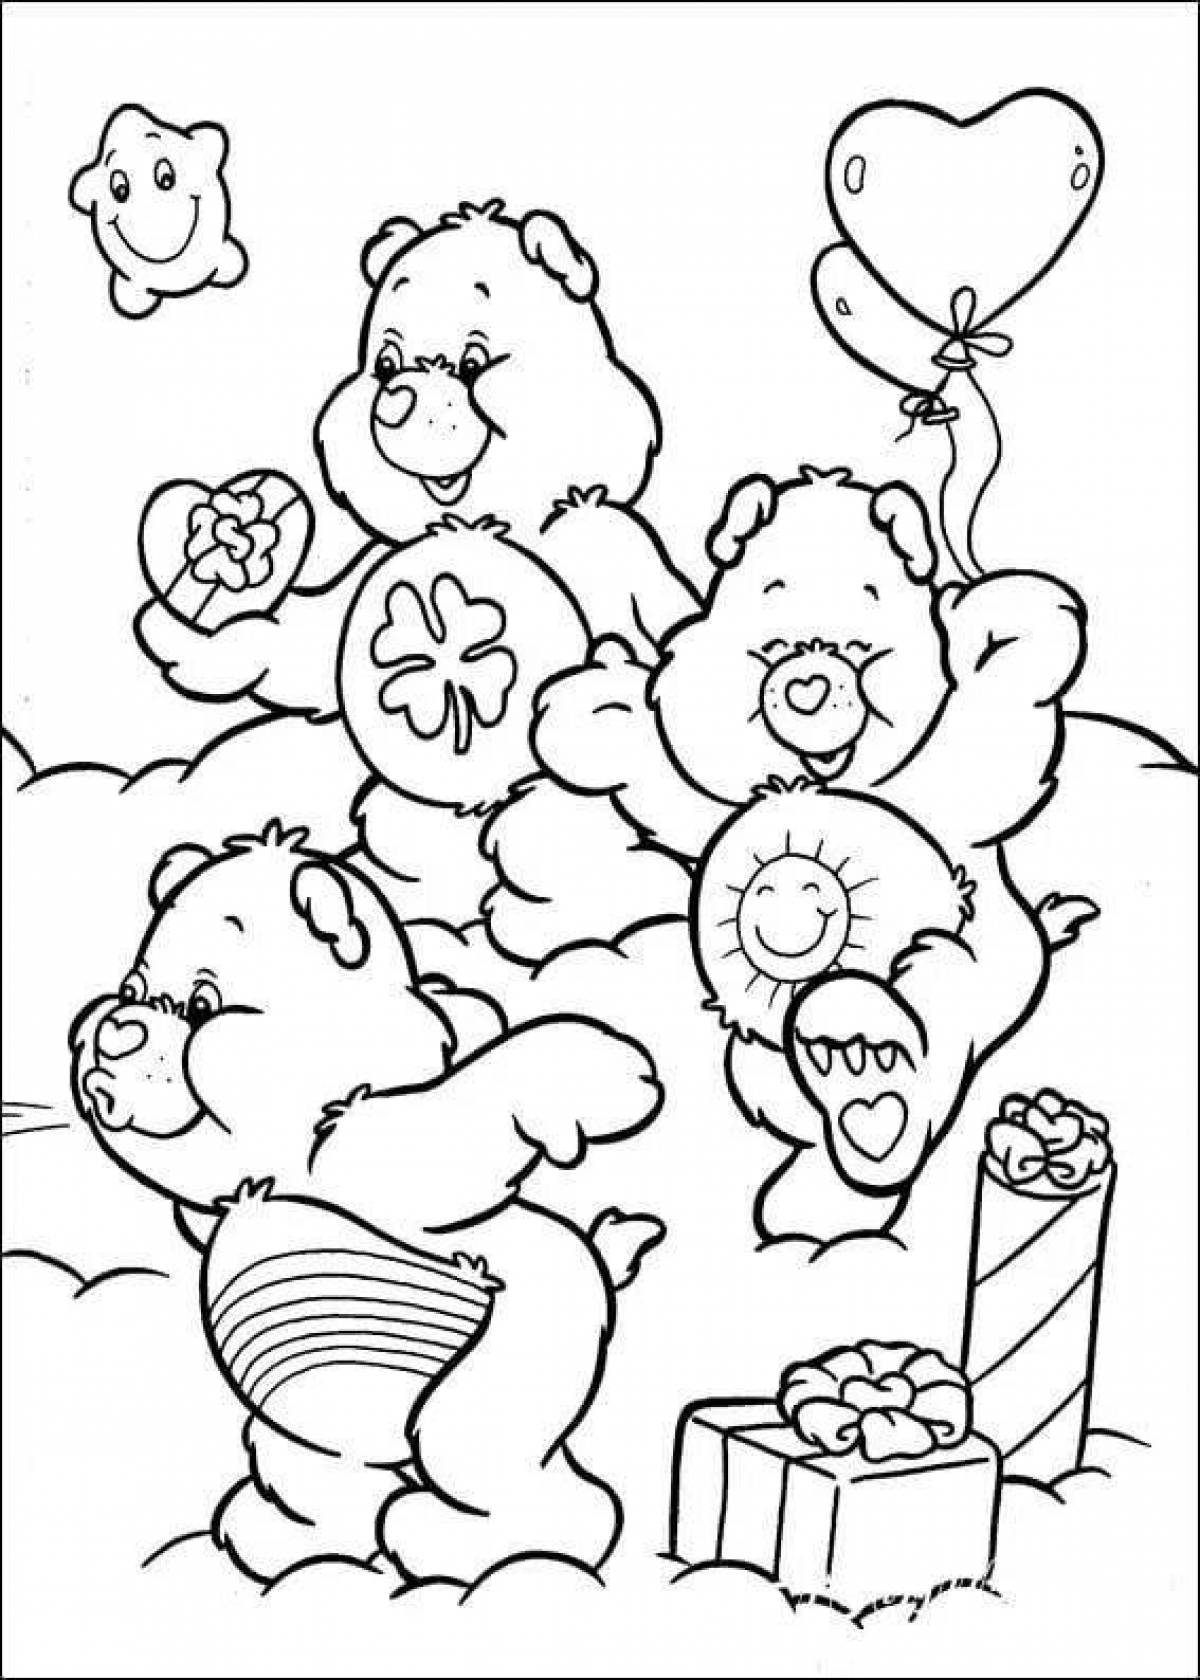 Coloring magical care bears